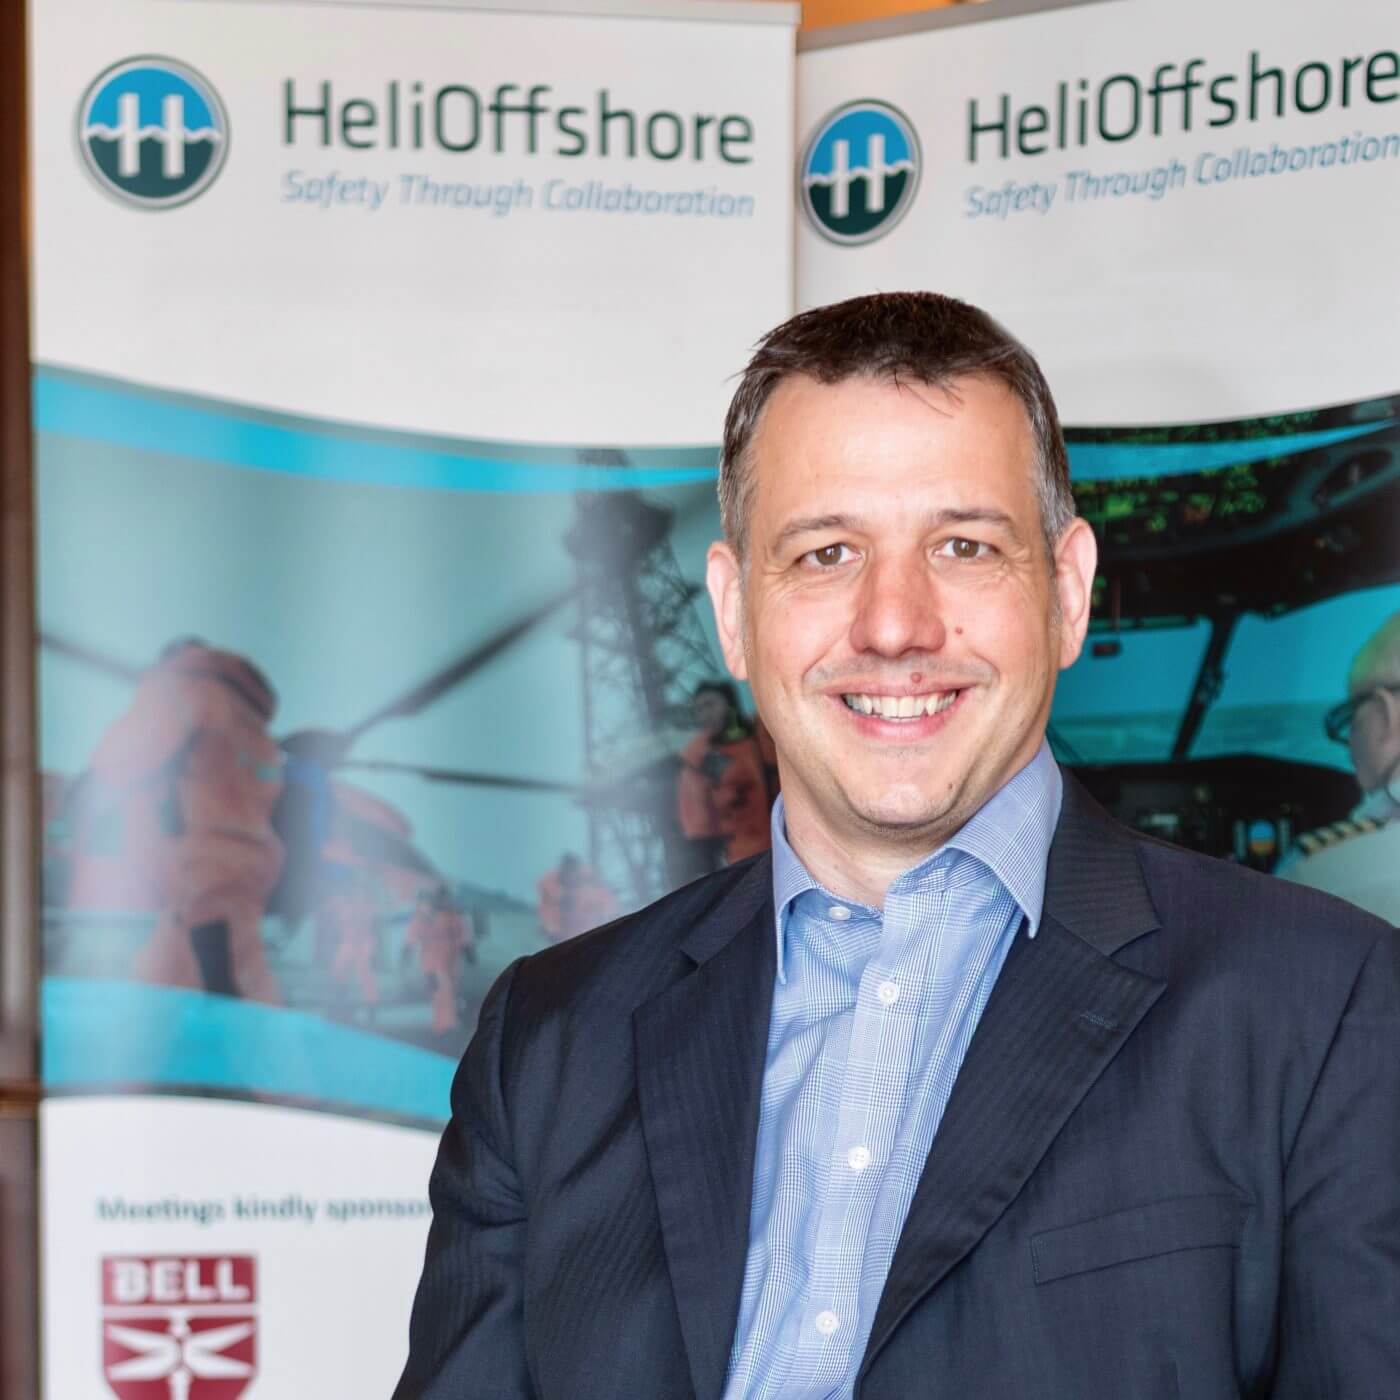 HeliOffshore's governance process now dictates how a request for data gets approved, what will happen to the data once it is submitted and how results can be published.